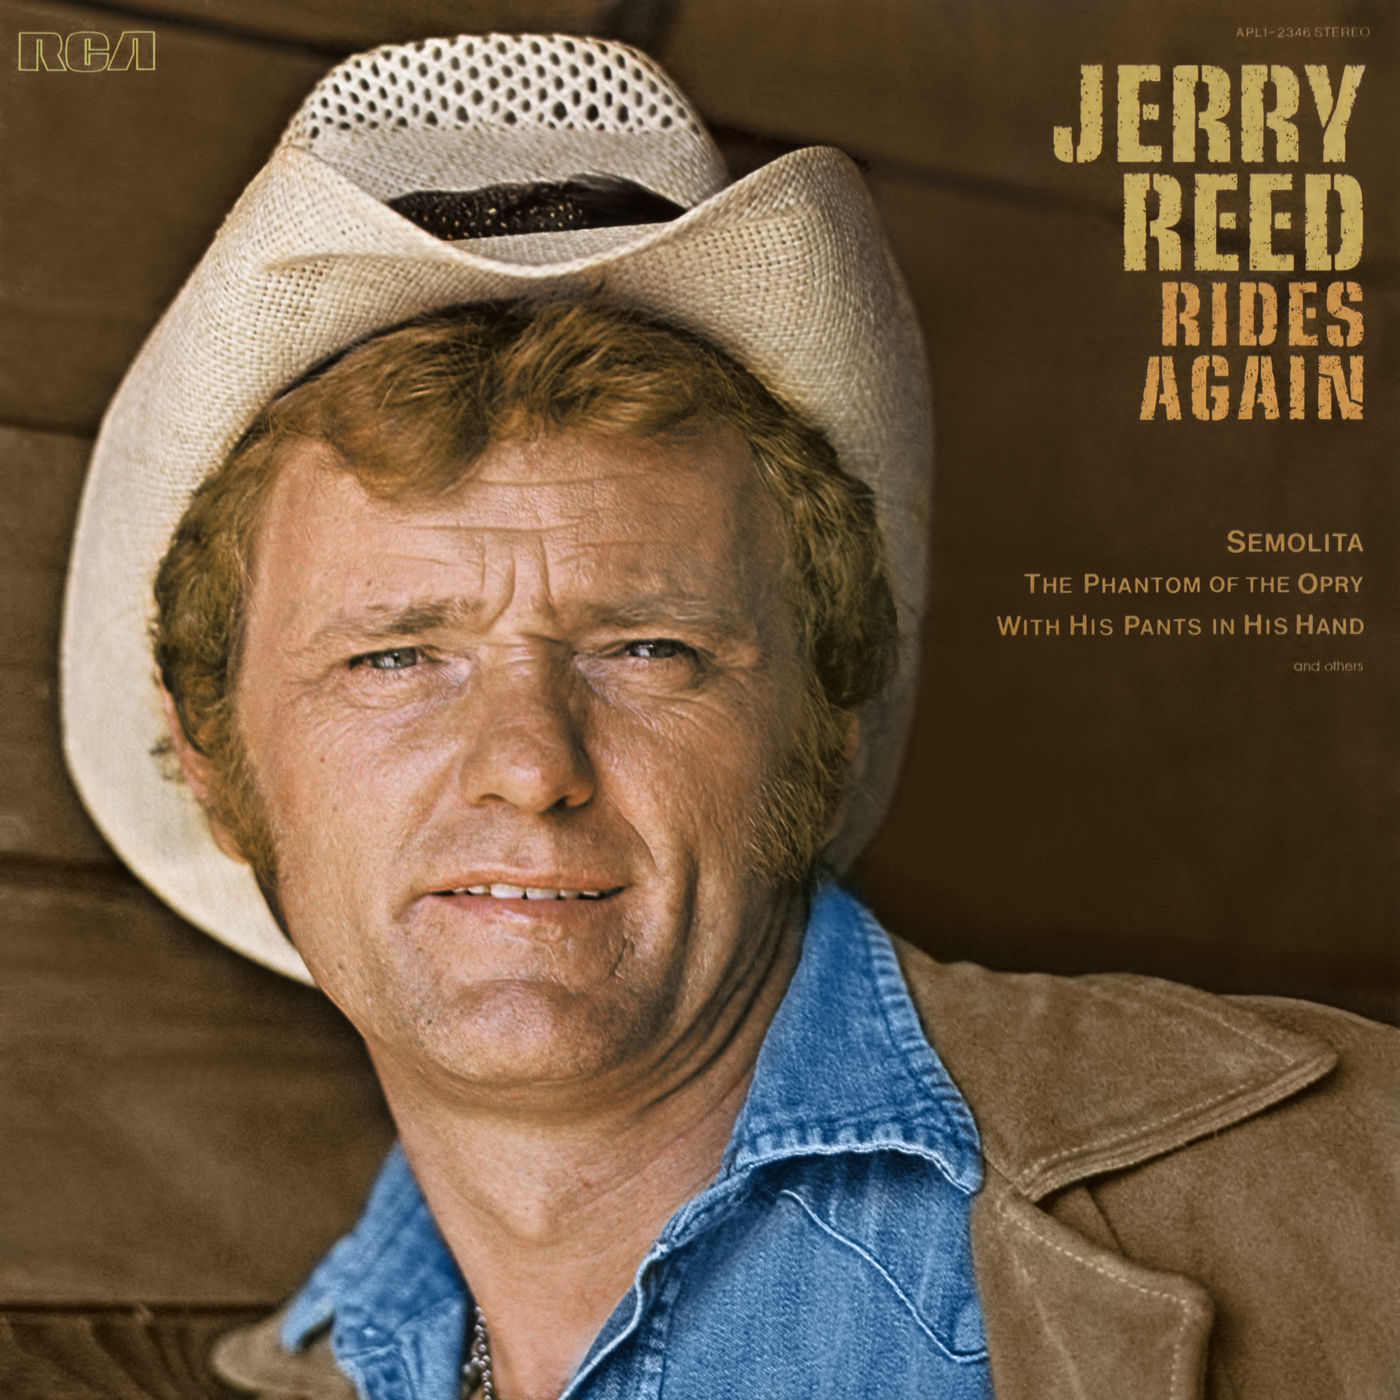 Jerry Reed – Rides Again